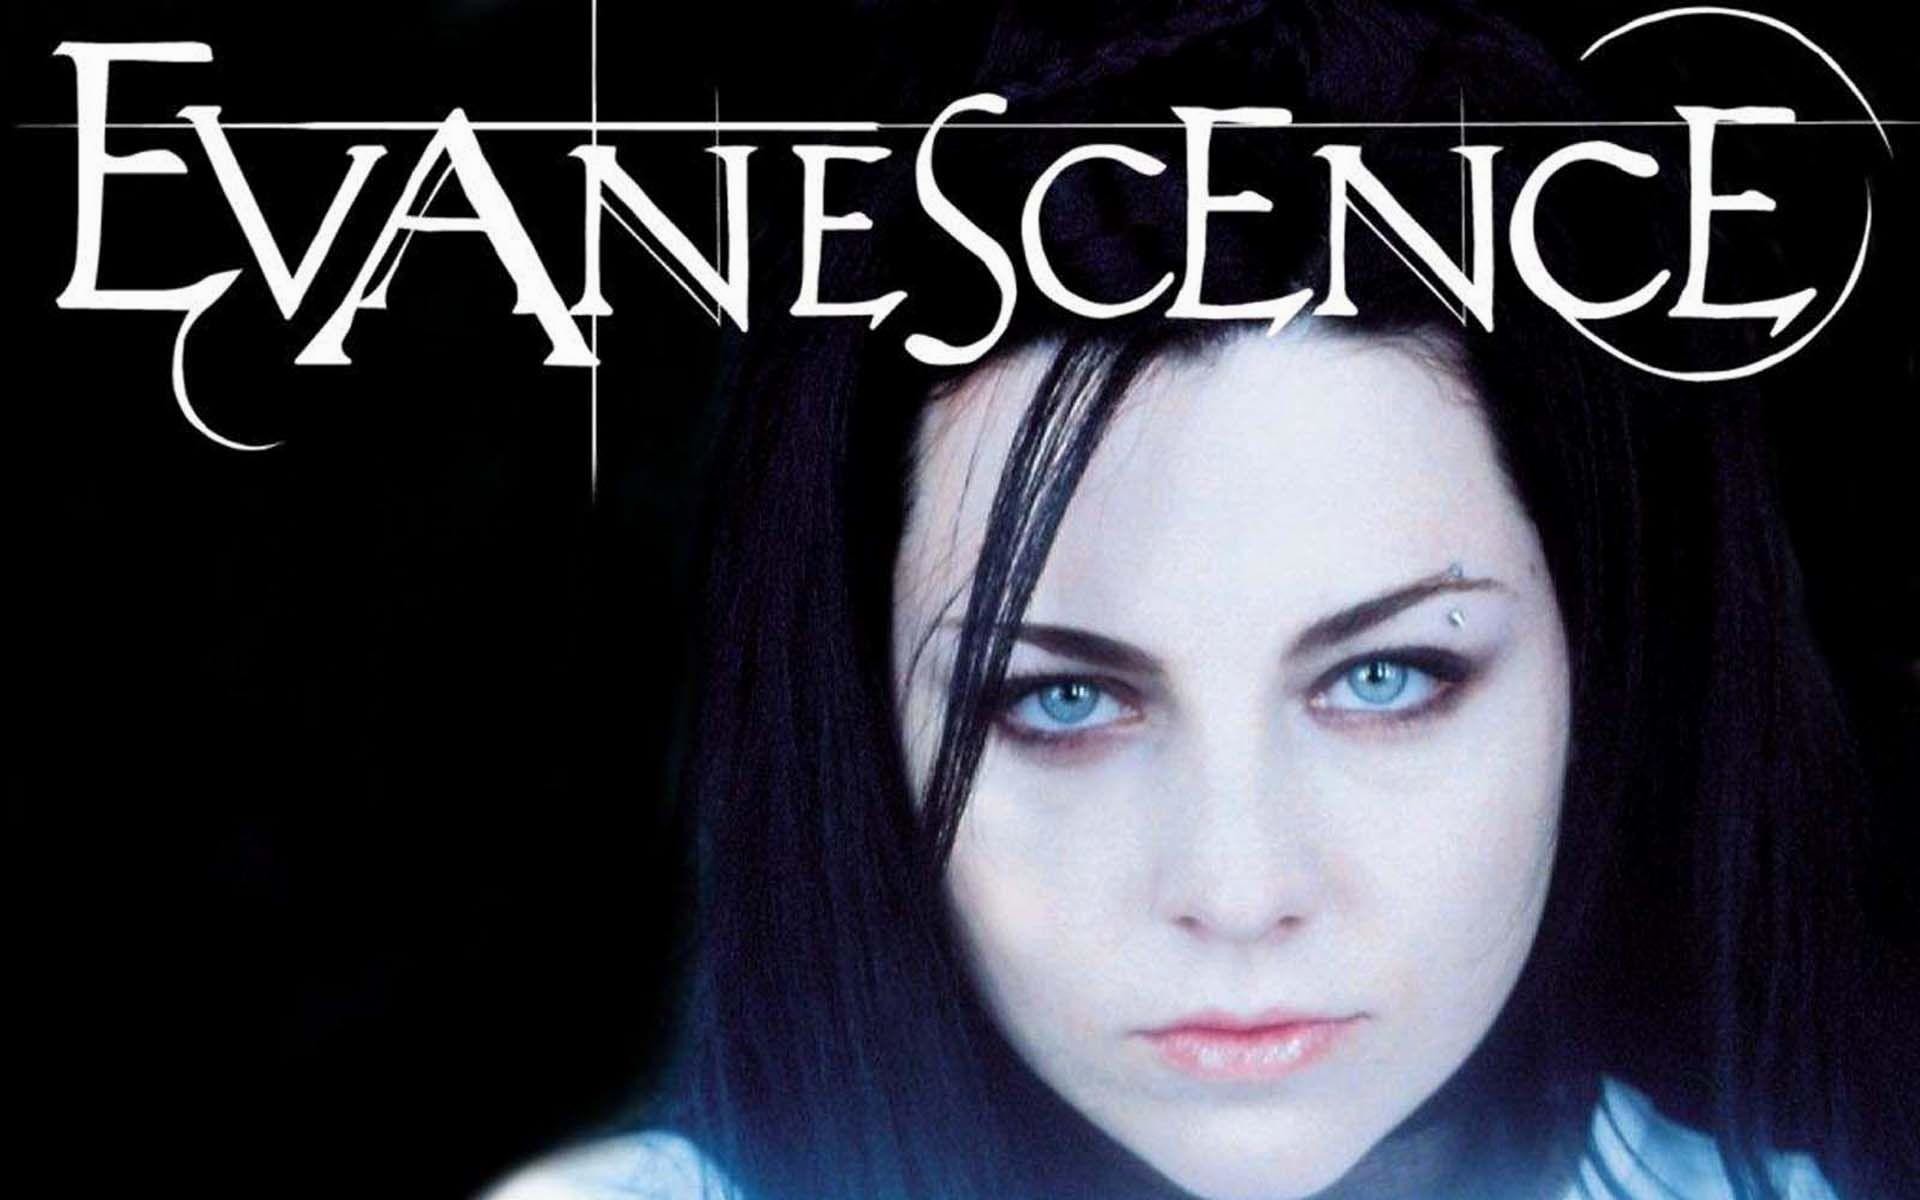 Wallpaper.wiki Beautiful Evanescence wallpapers PIC WPB006117